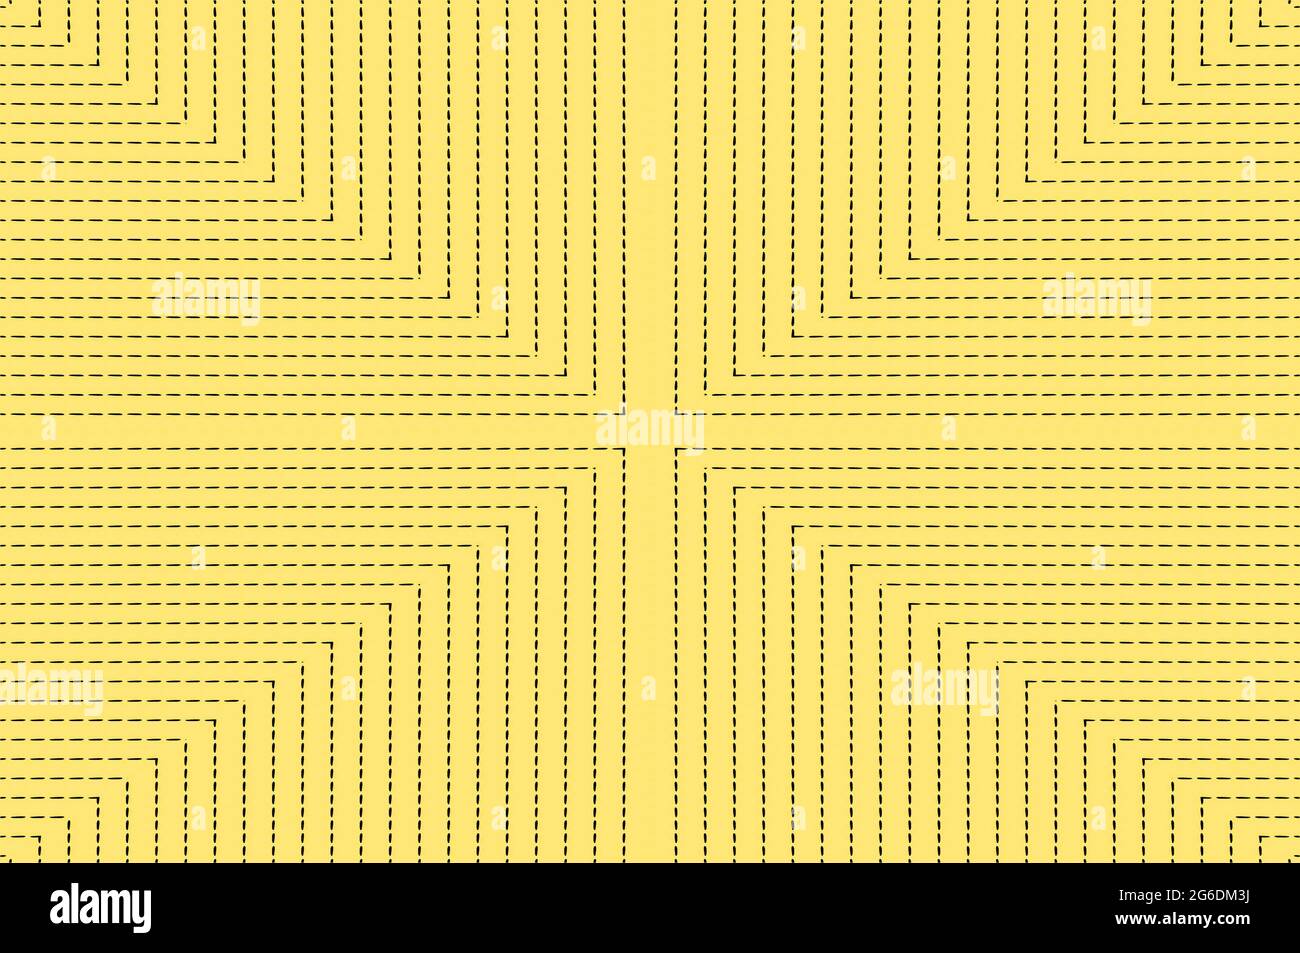 Yellow background is covered in lines and dots coming to a T at center of image.  This image could represent the concept of 'connect the dots.' Stock Photo